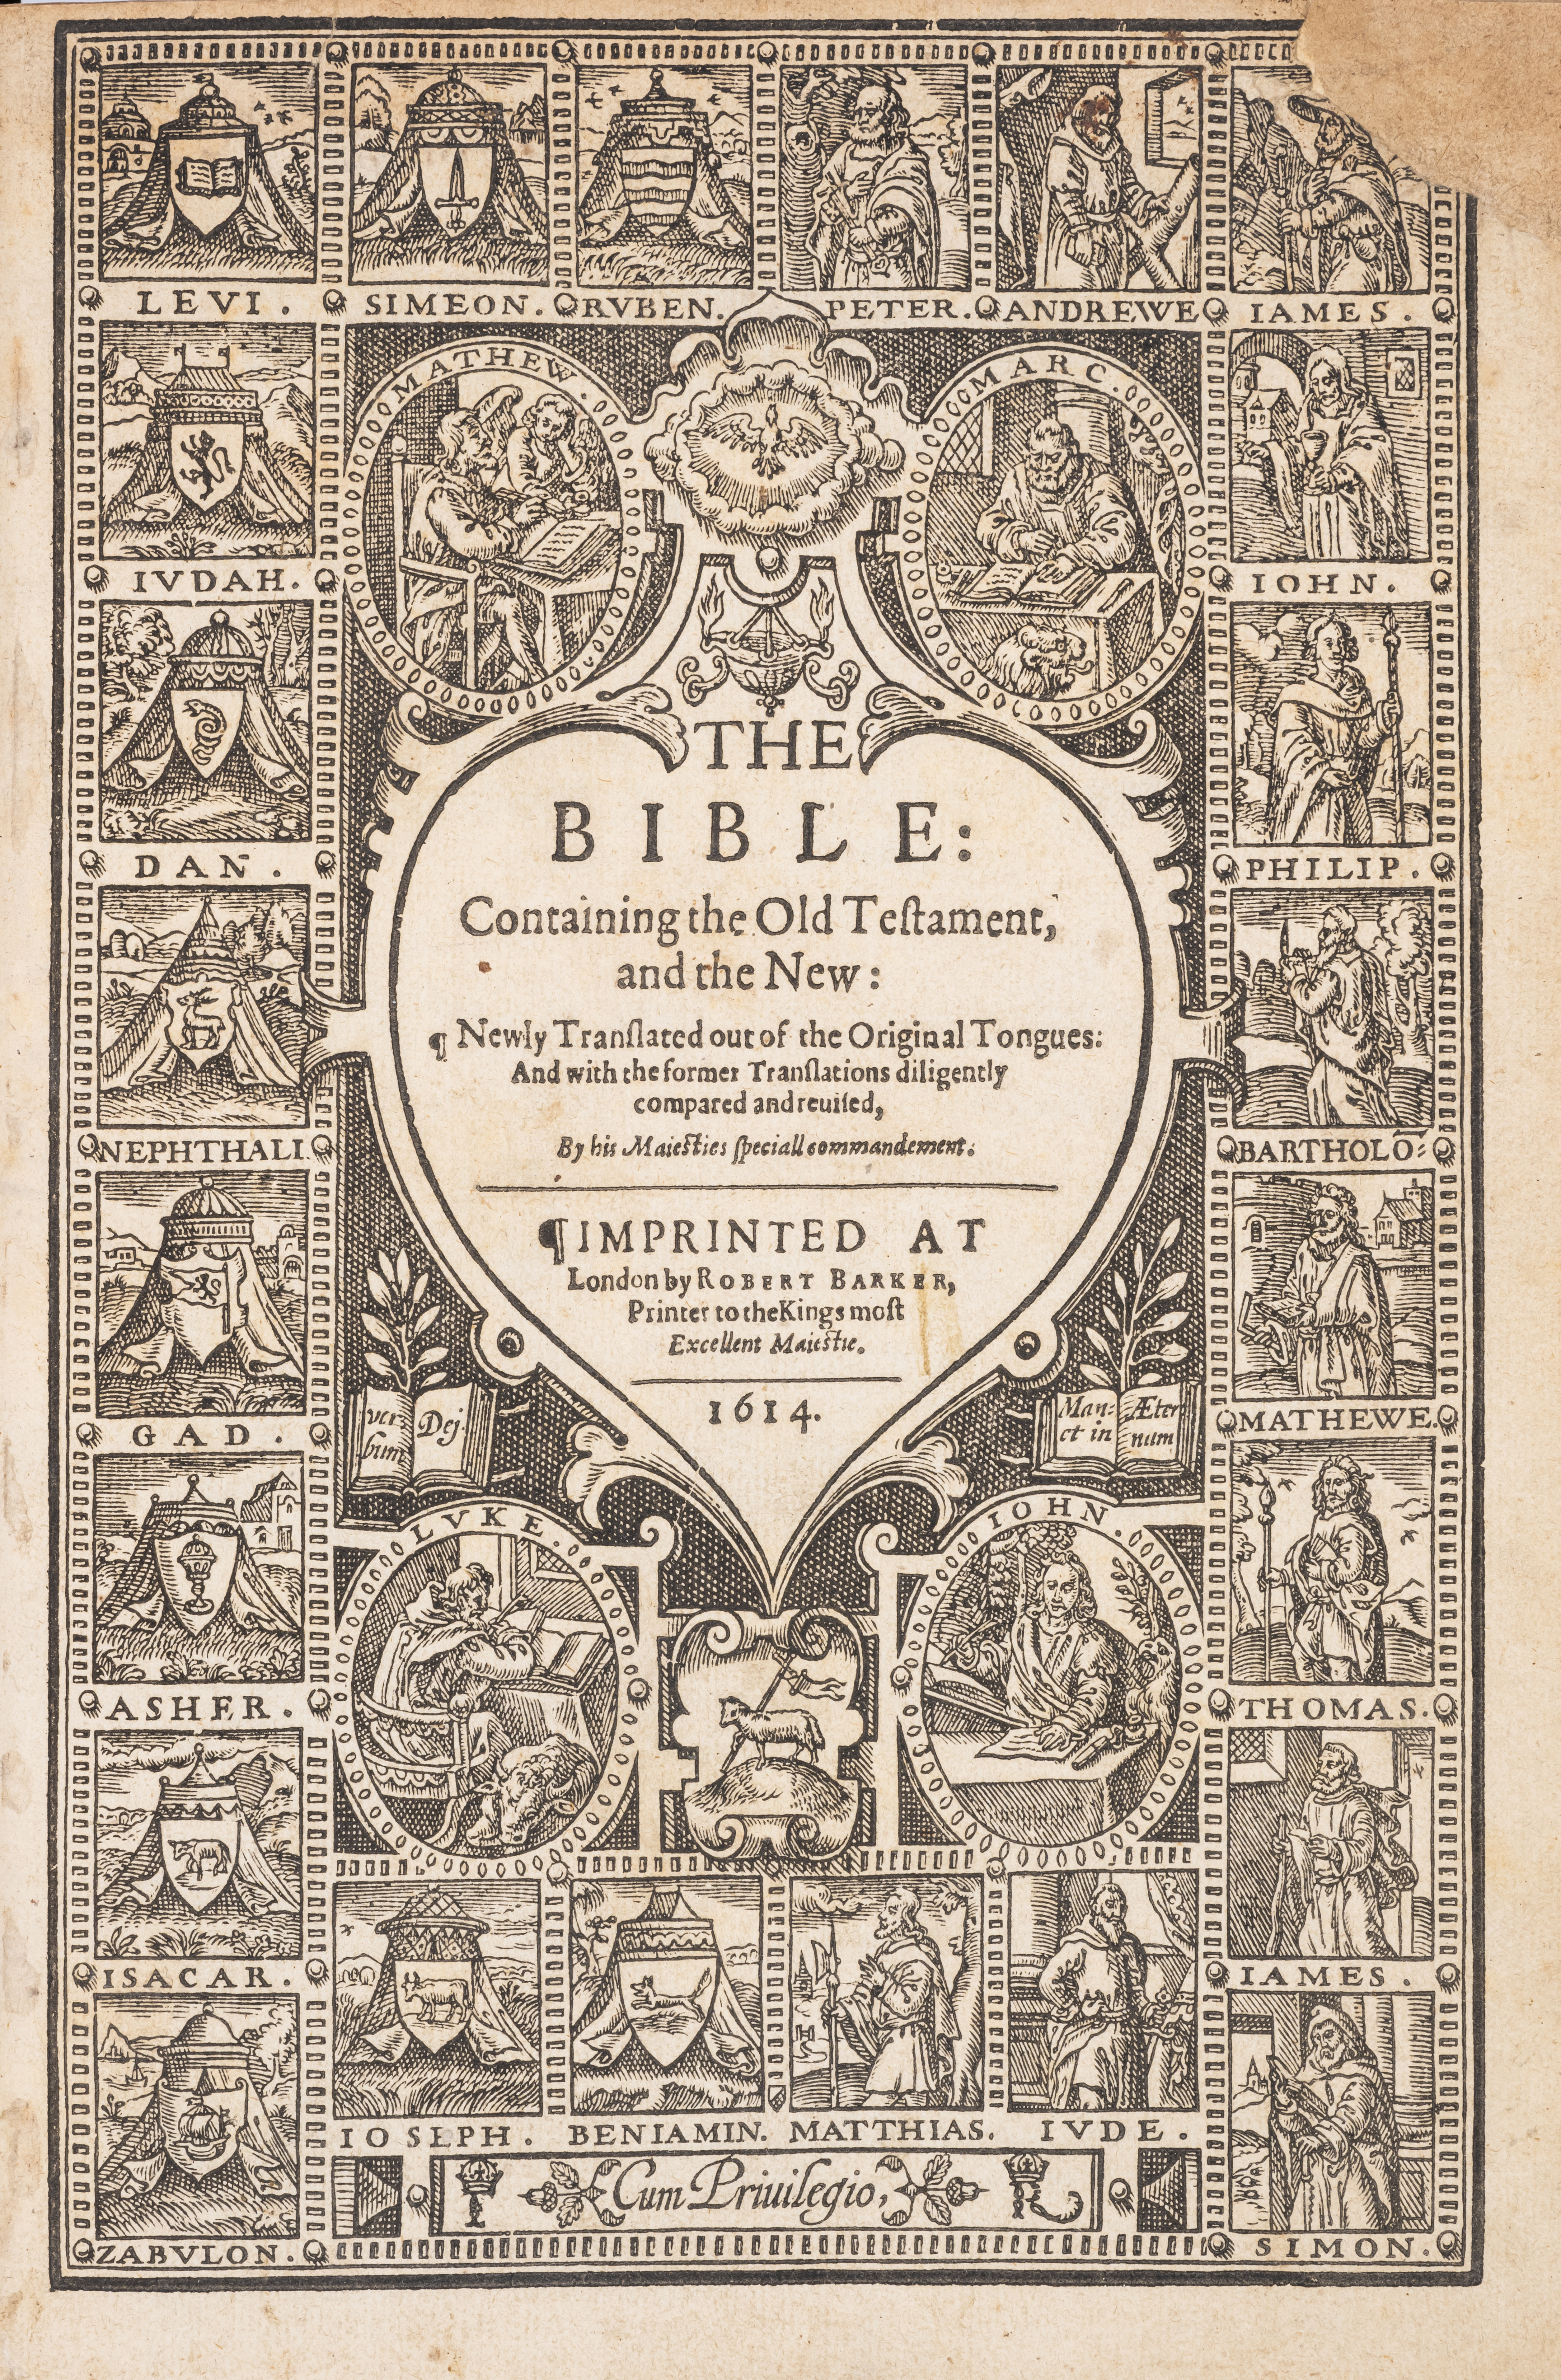 Bible, English. The Bible: Containing the Old Testament, and the New, Robert Barker, 1614 [but 16...